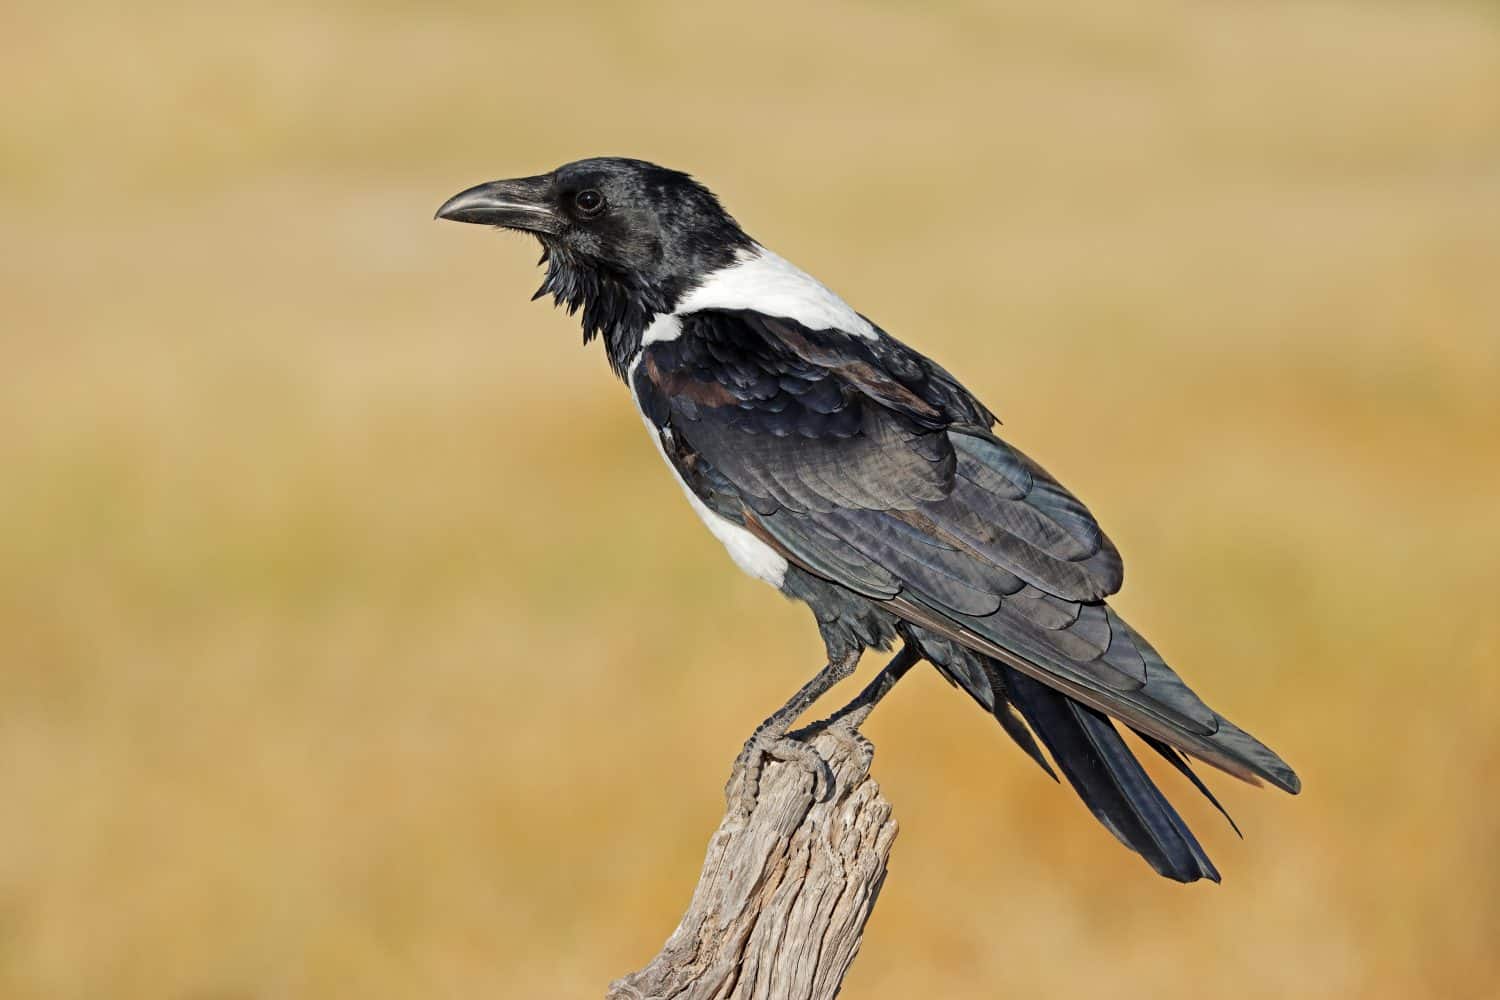 A pied crow (Corvus albus) perched on a branch, Etosha National Park, Namibia